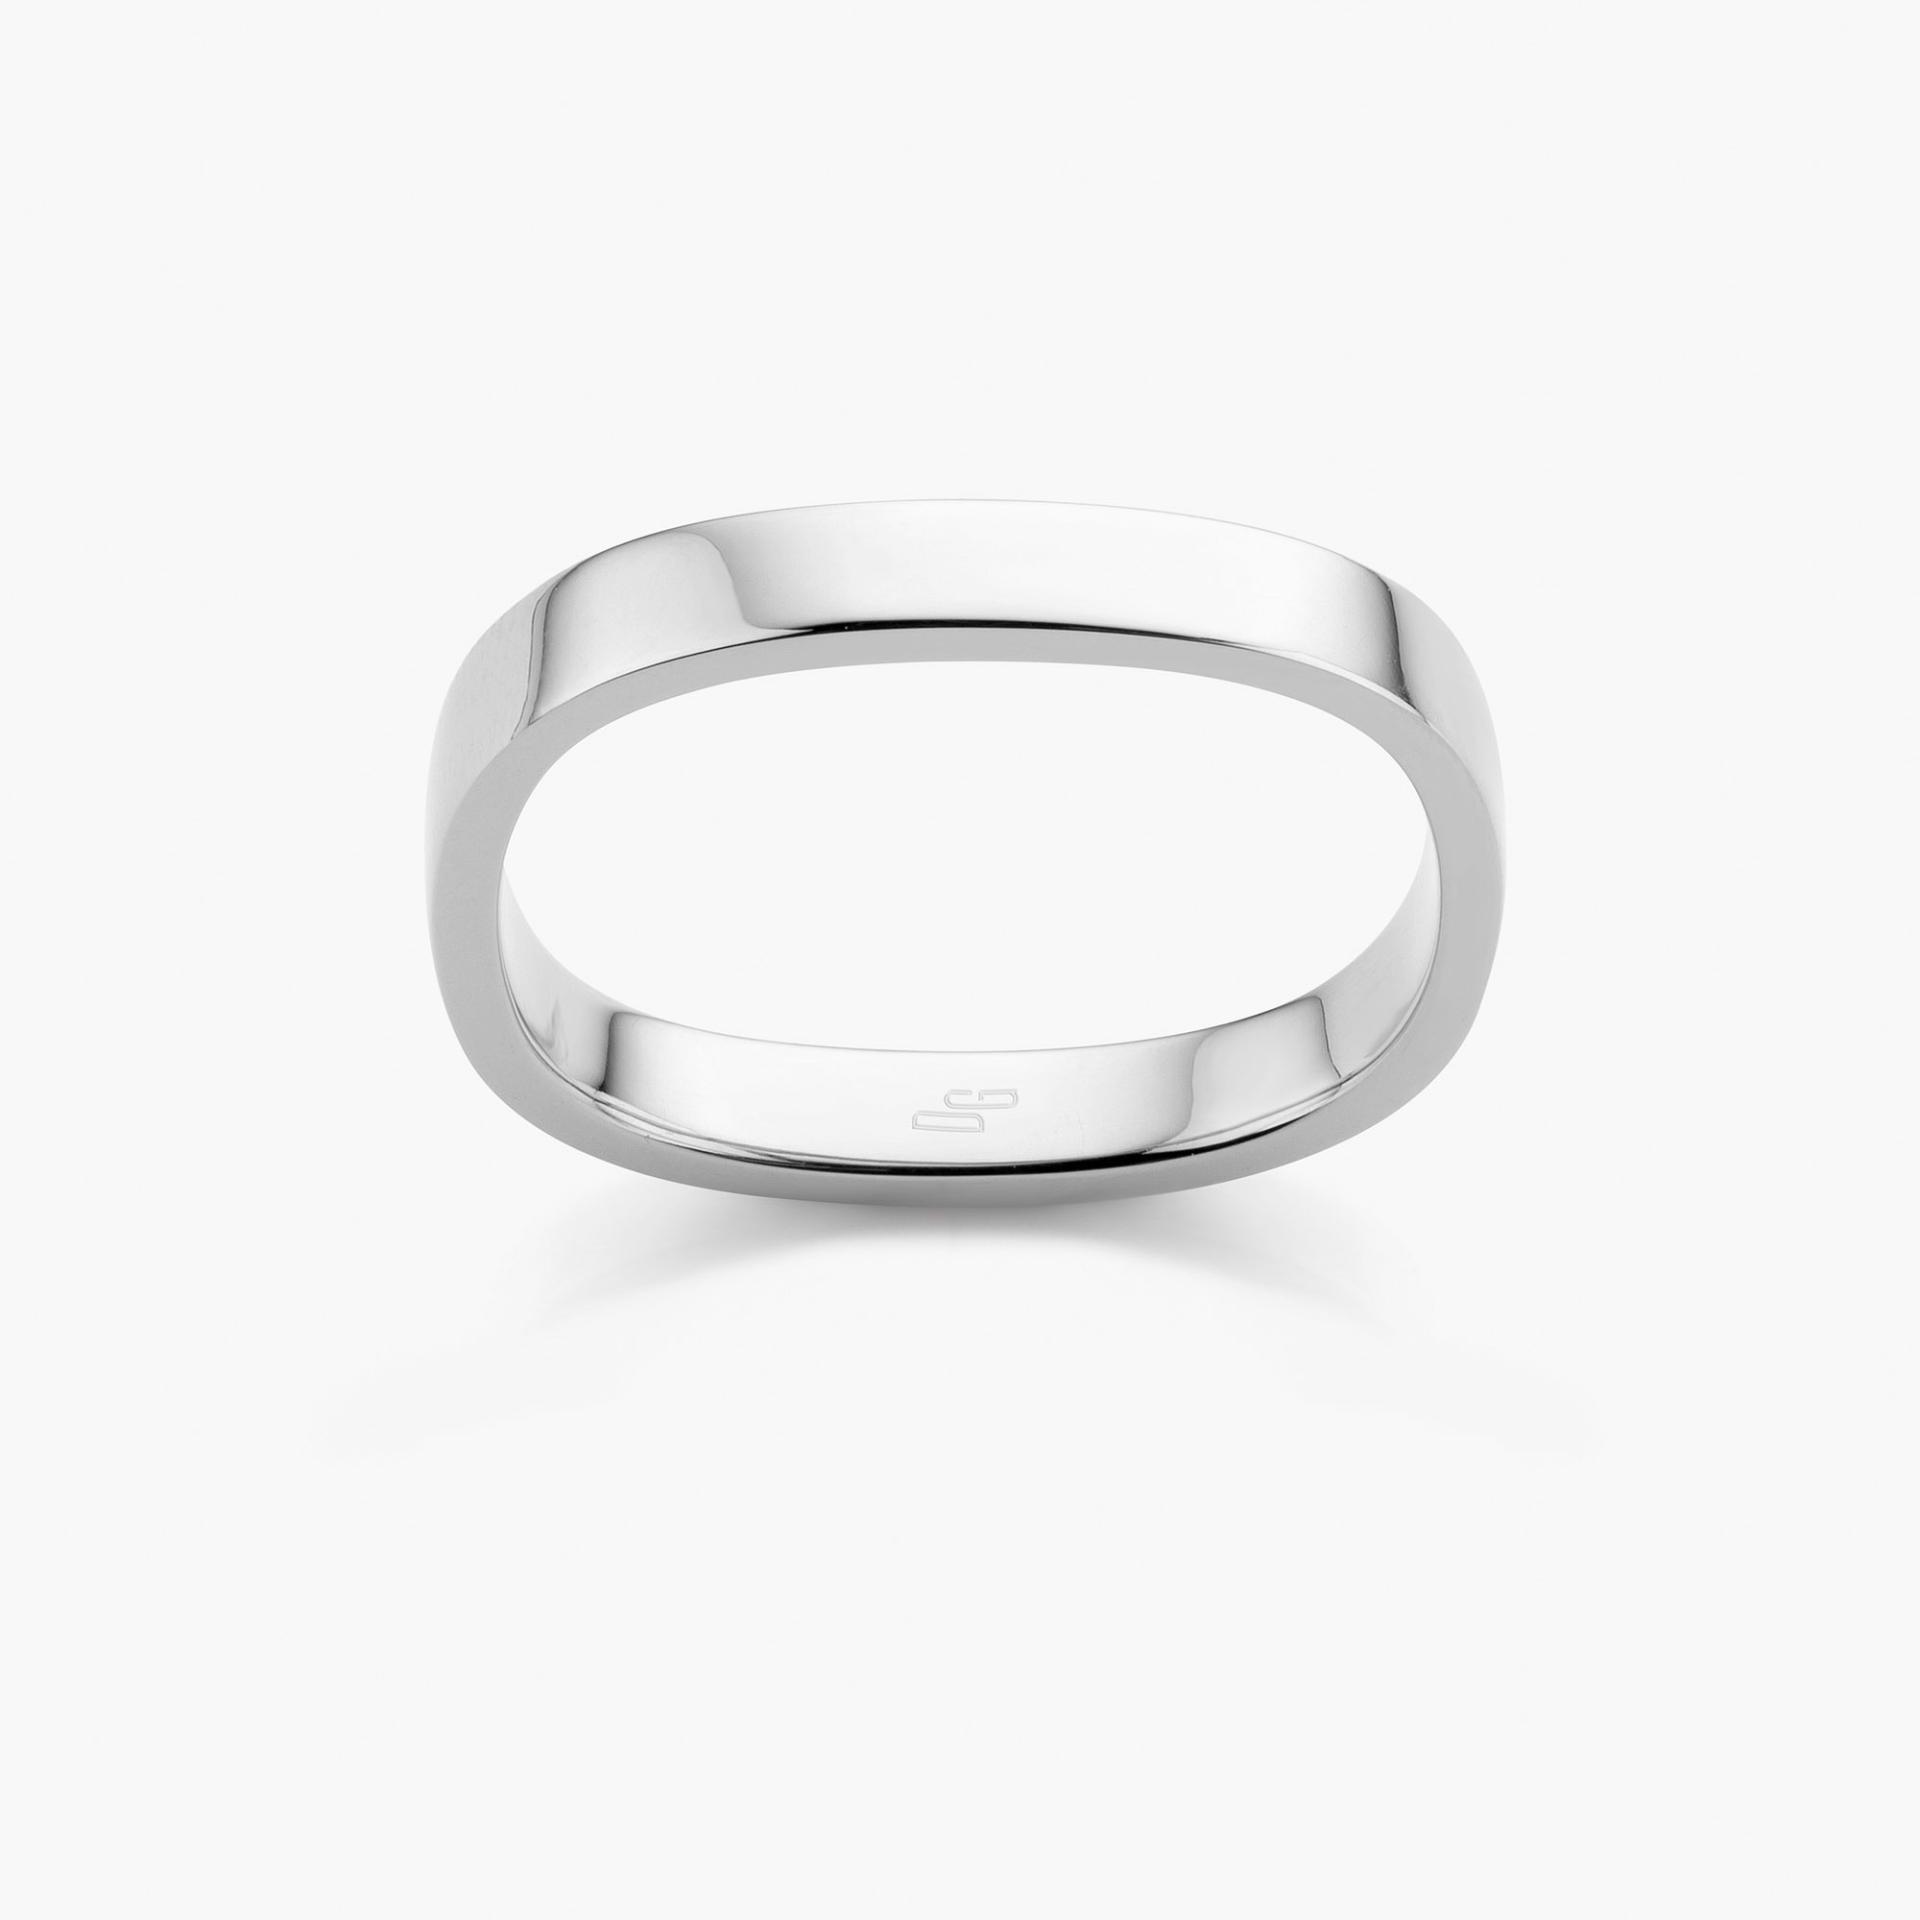 Wedding ring Bold model made by Maison De Greef